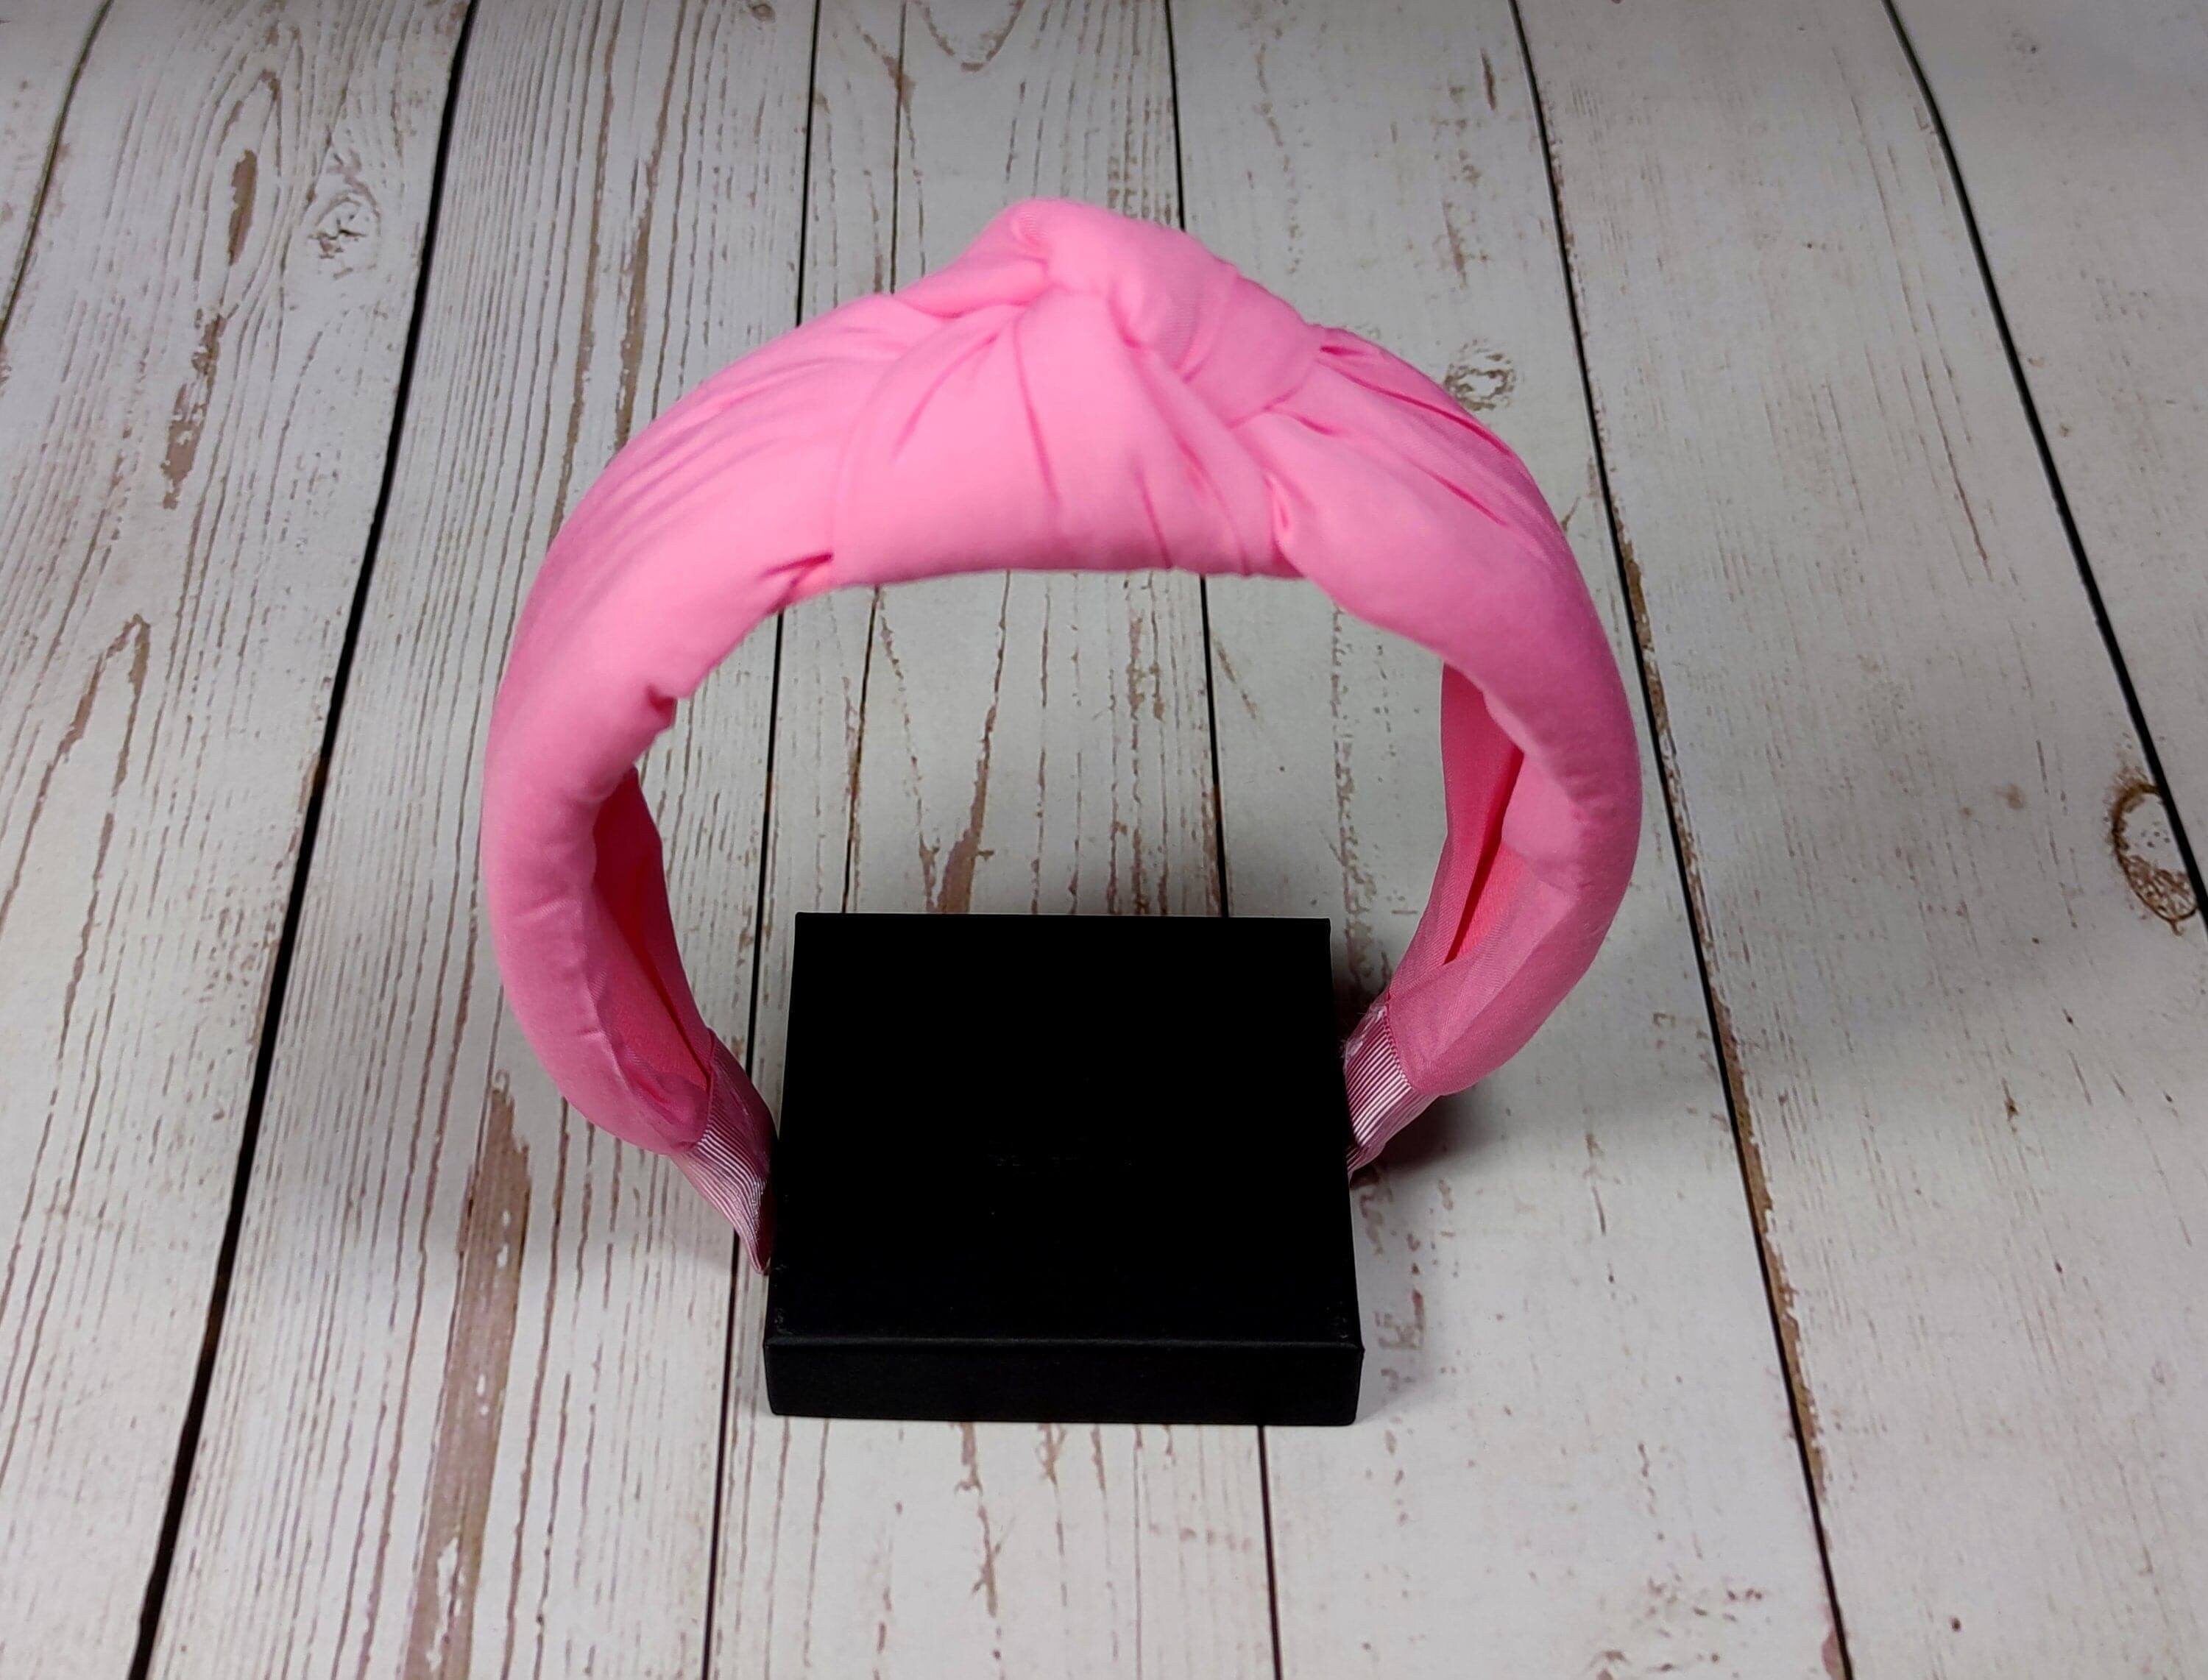 Looking for a unique and fashionable headband? Check out our wide range of light pink headbands, handmade headbands, and pattern headbands!